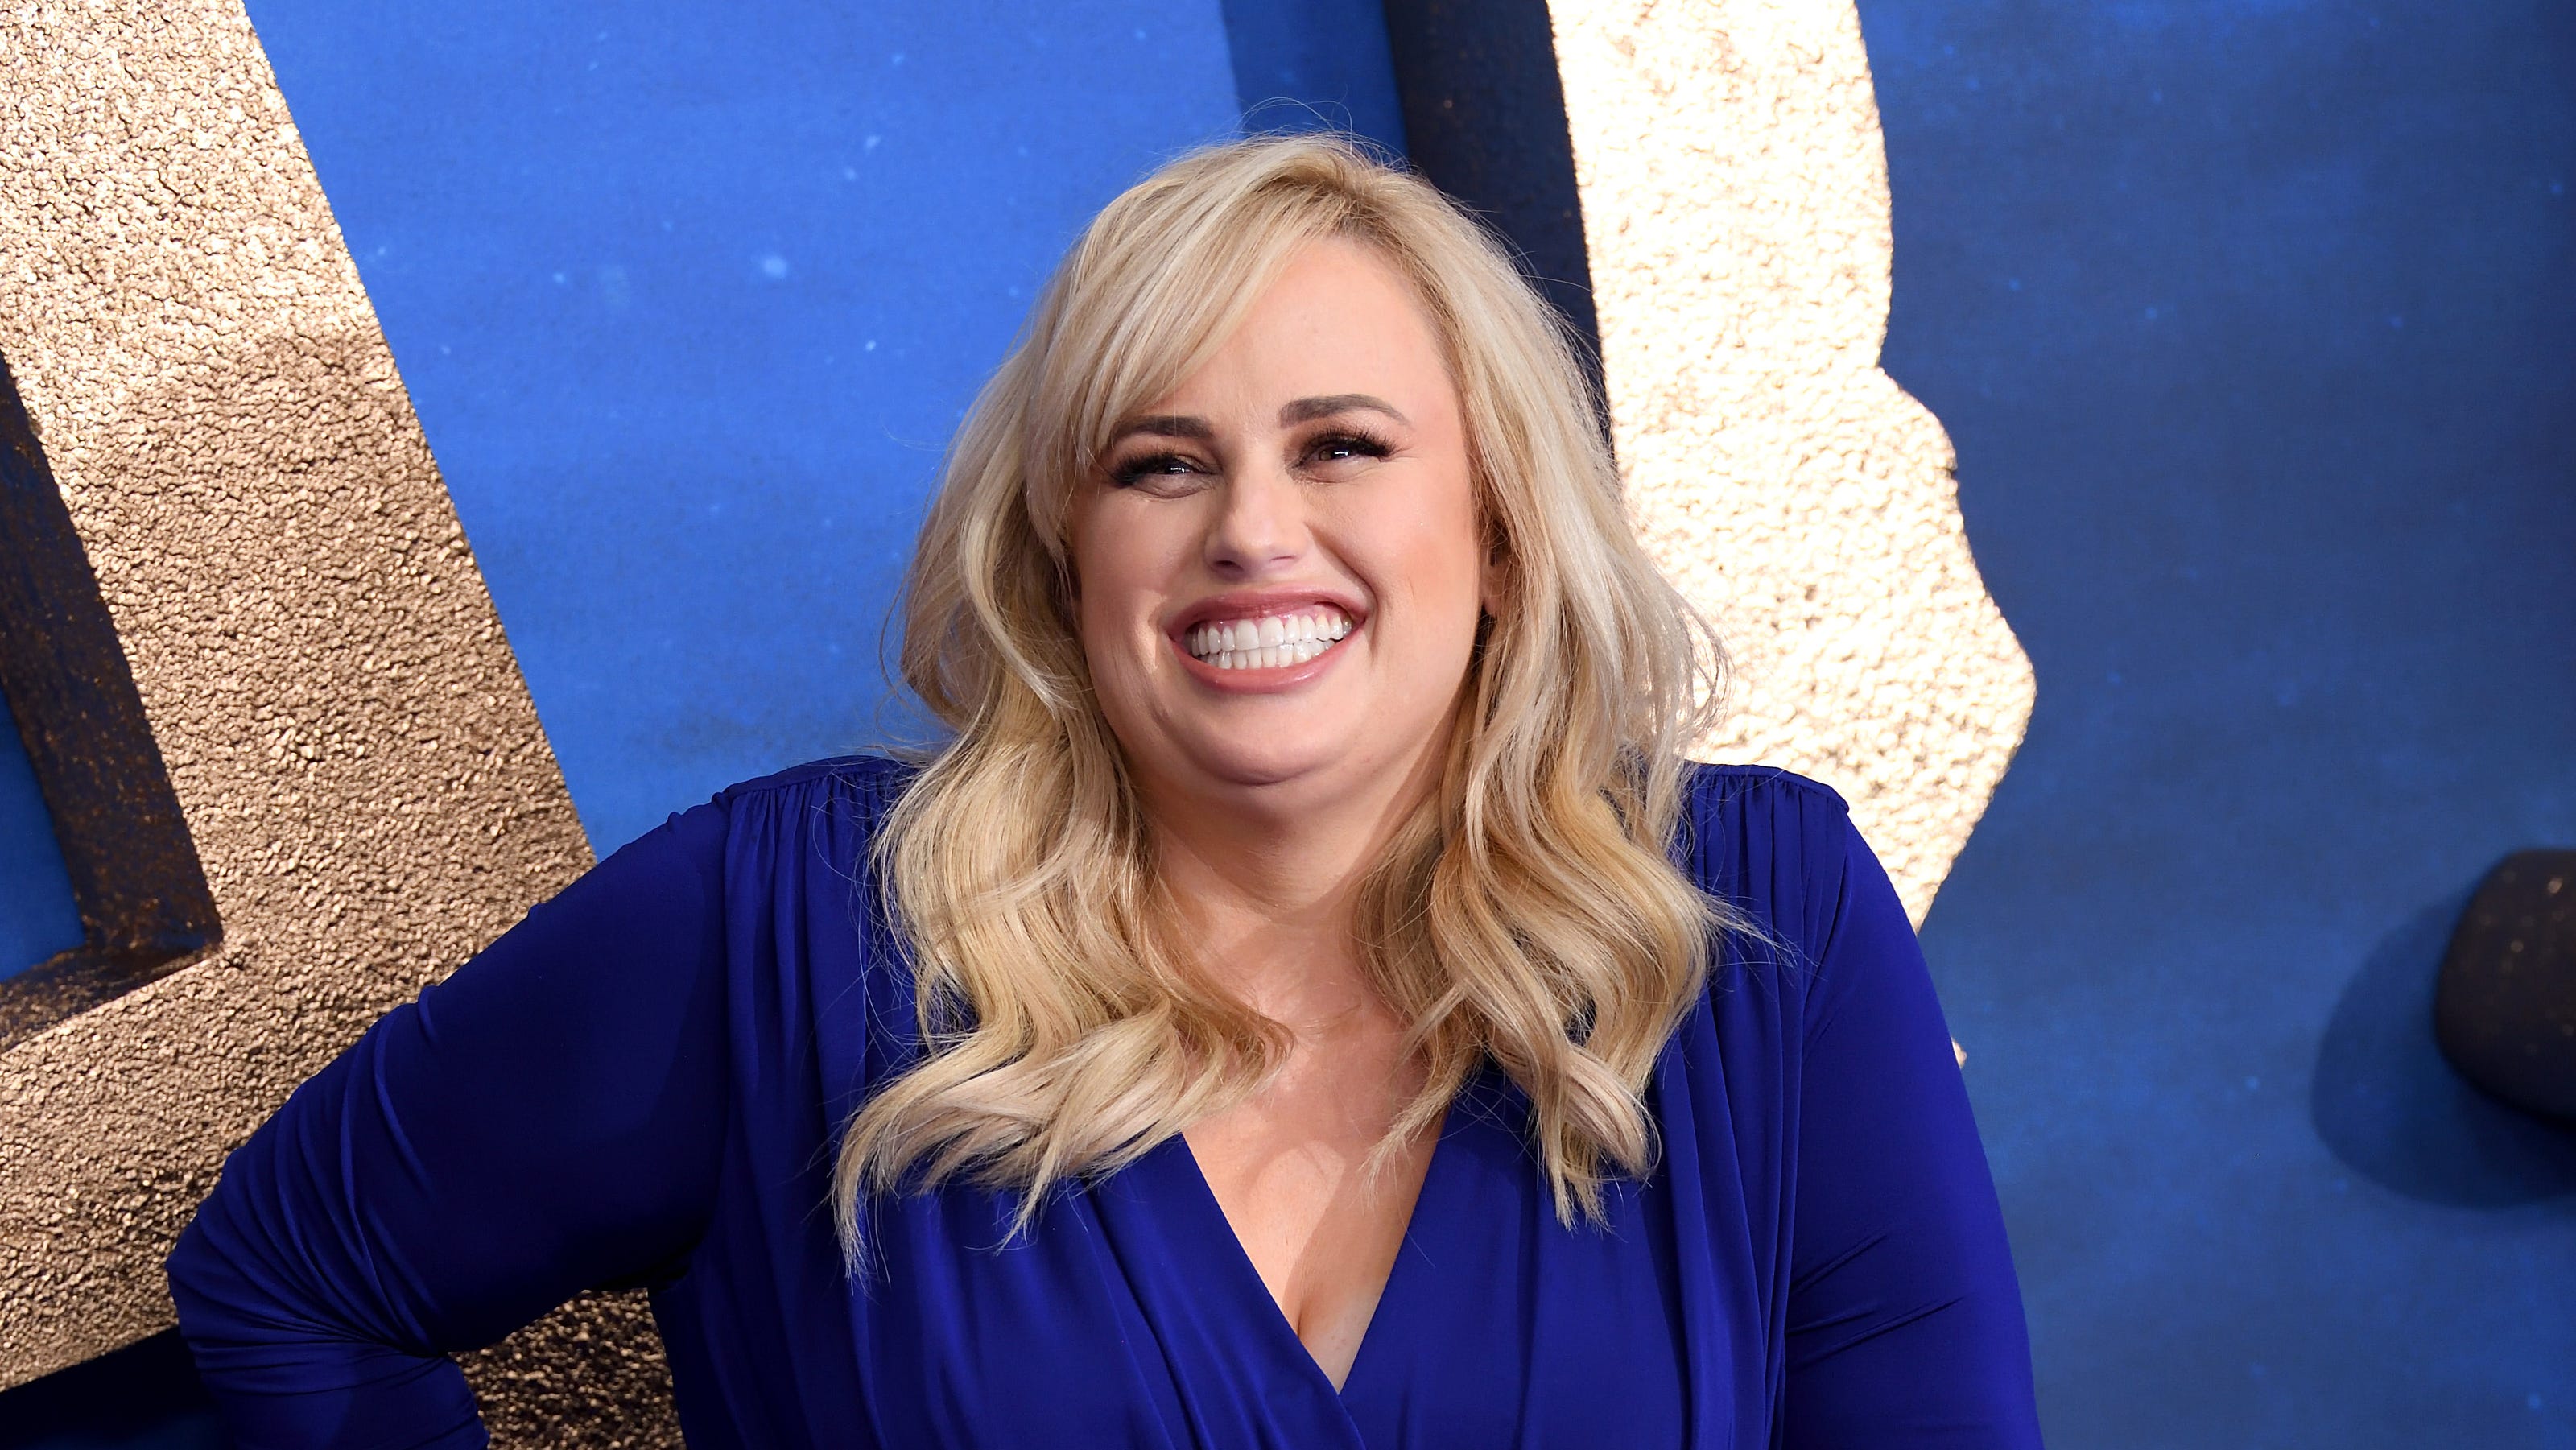 Rebel Wilson and Adele speak out in same week amid scrutiny over weight loss